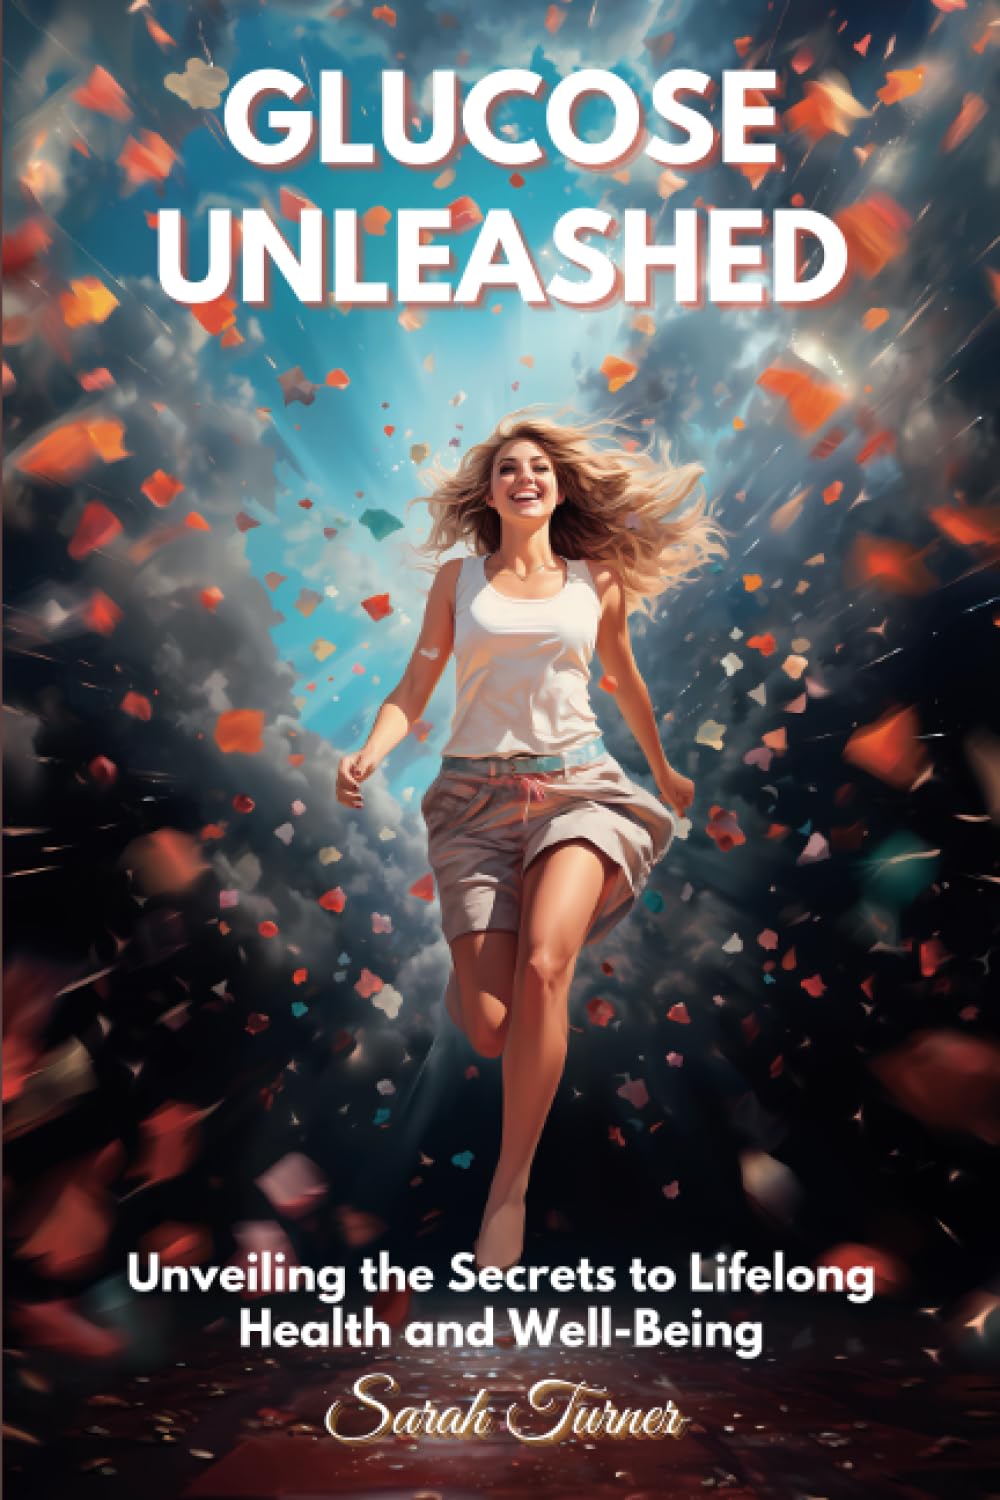 Glucose Unleashed: Unveiling the Secrets to Lifelong Health and Well-Being. Empower Yourself to Conquer Glucose Challenges and Experience Optimal Living.